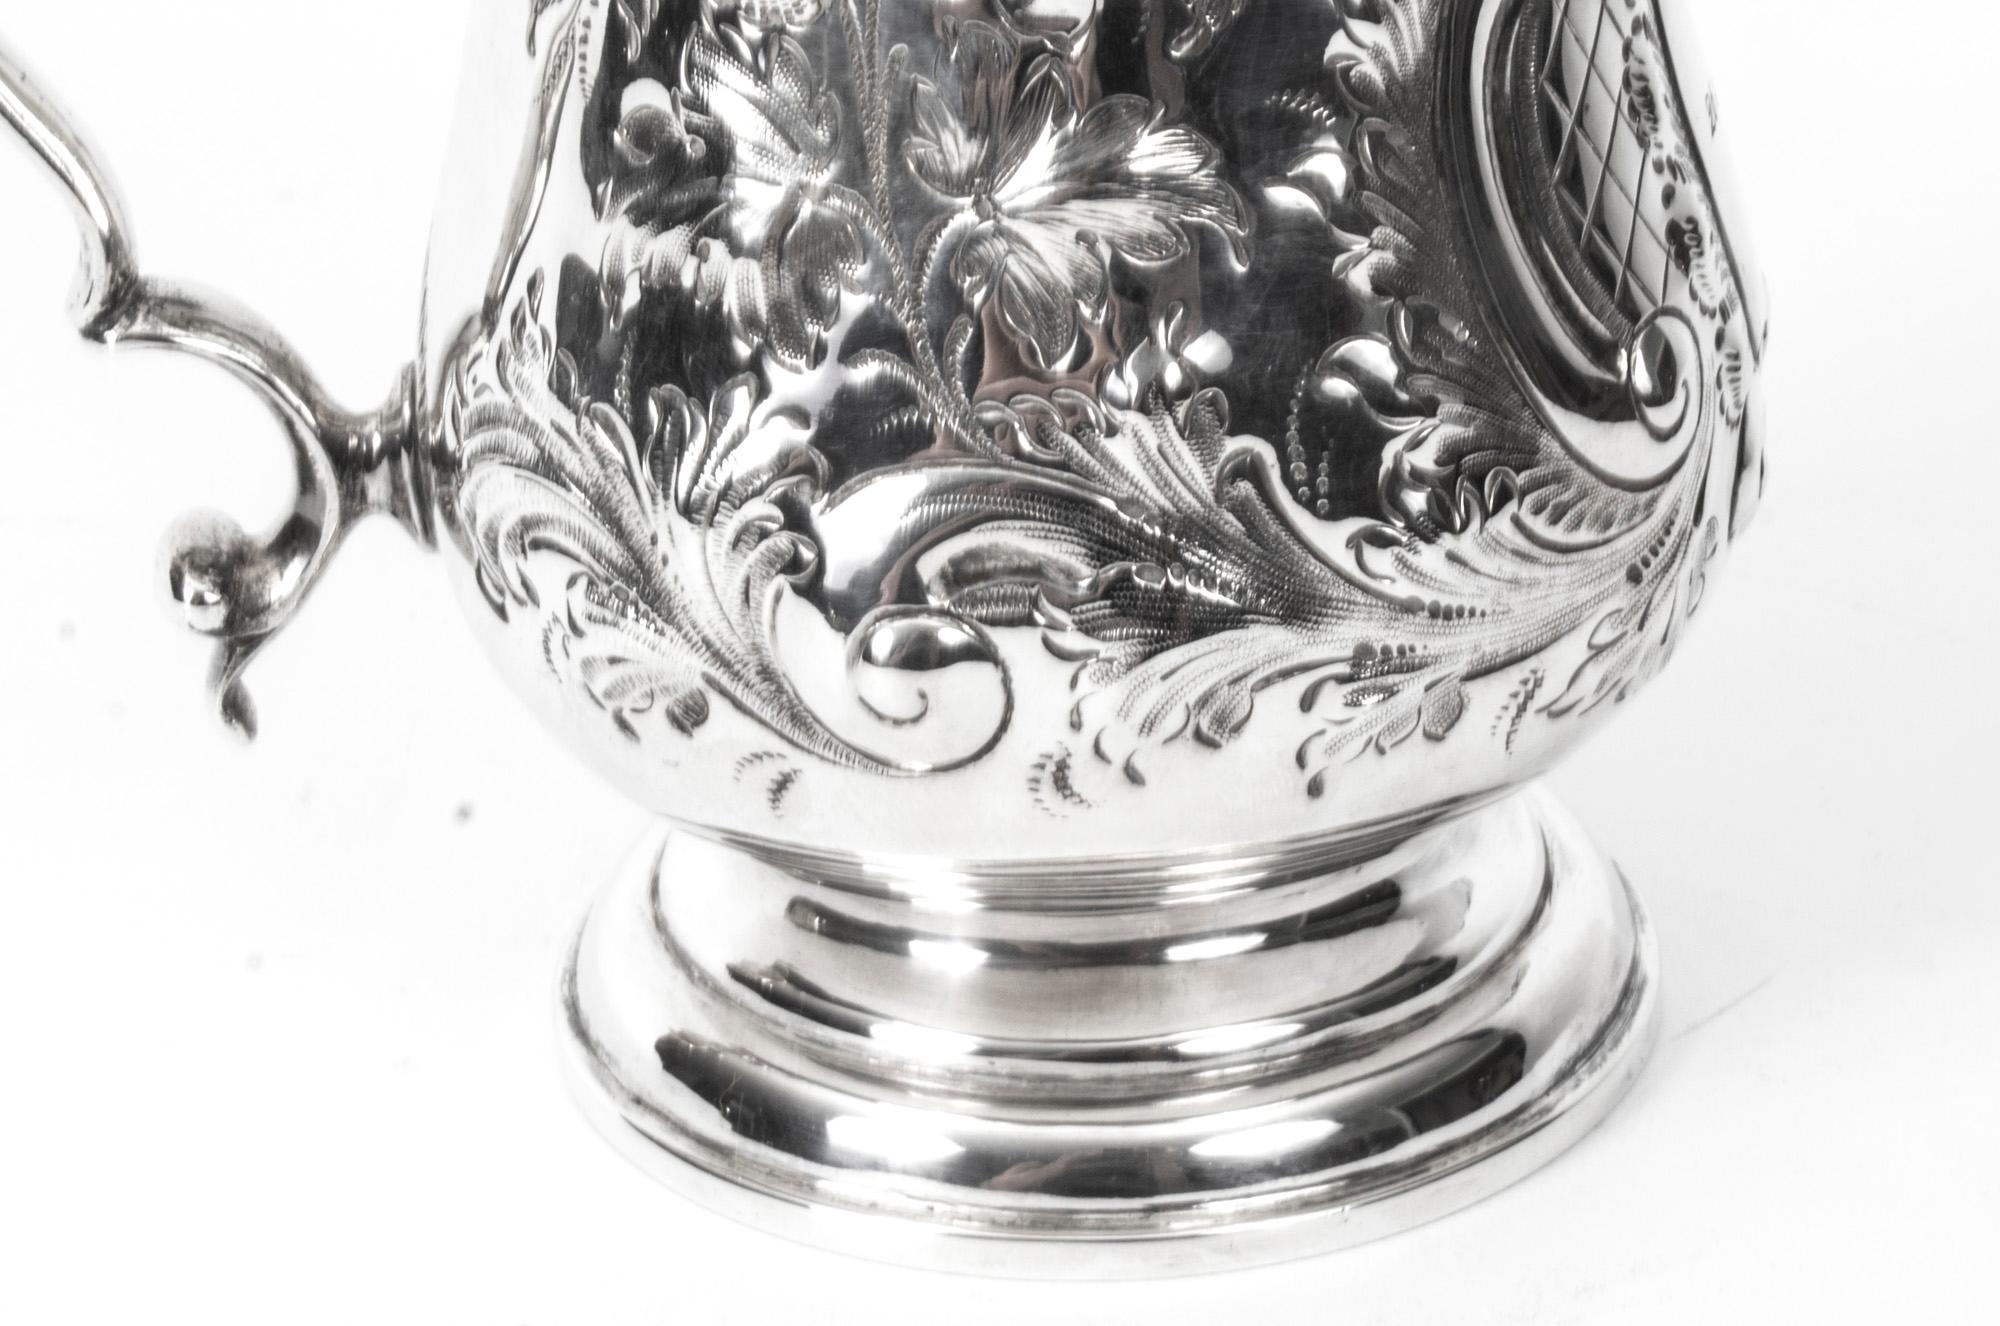 Antique Victorian Silver Plated Embossed and Engraved Mug 19th Century In Good Condition For Sale In London, GB